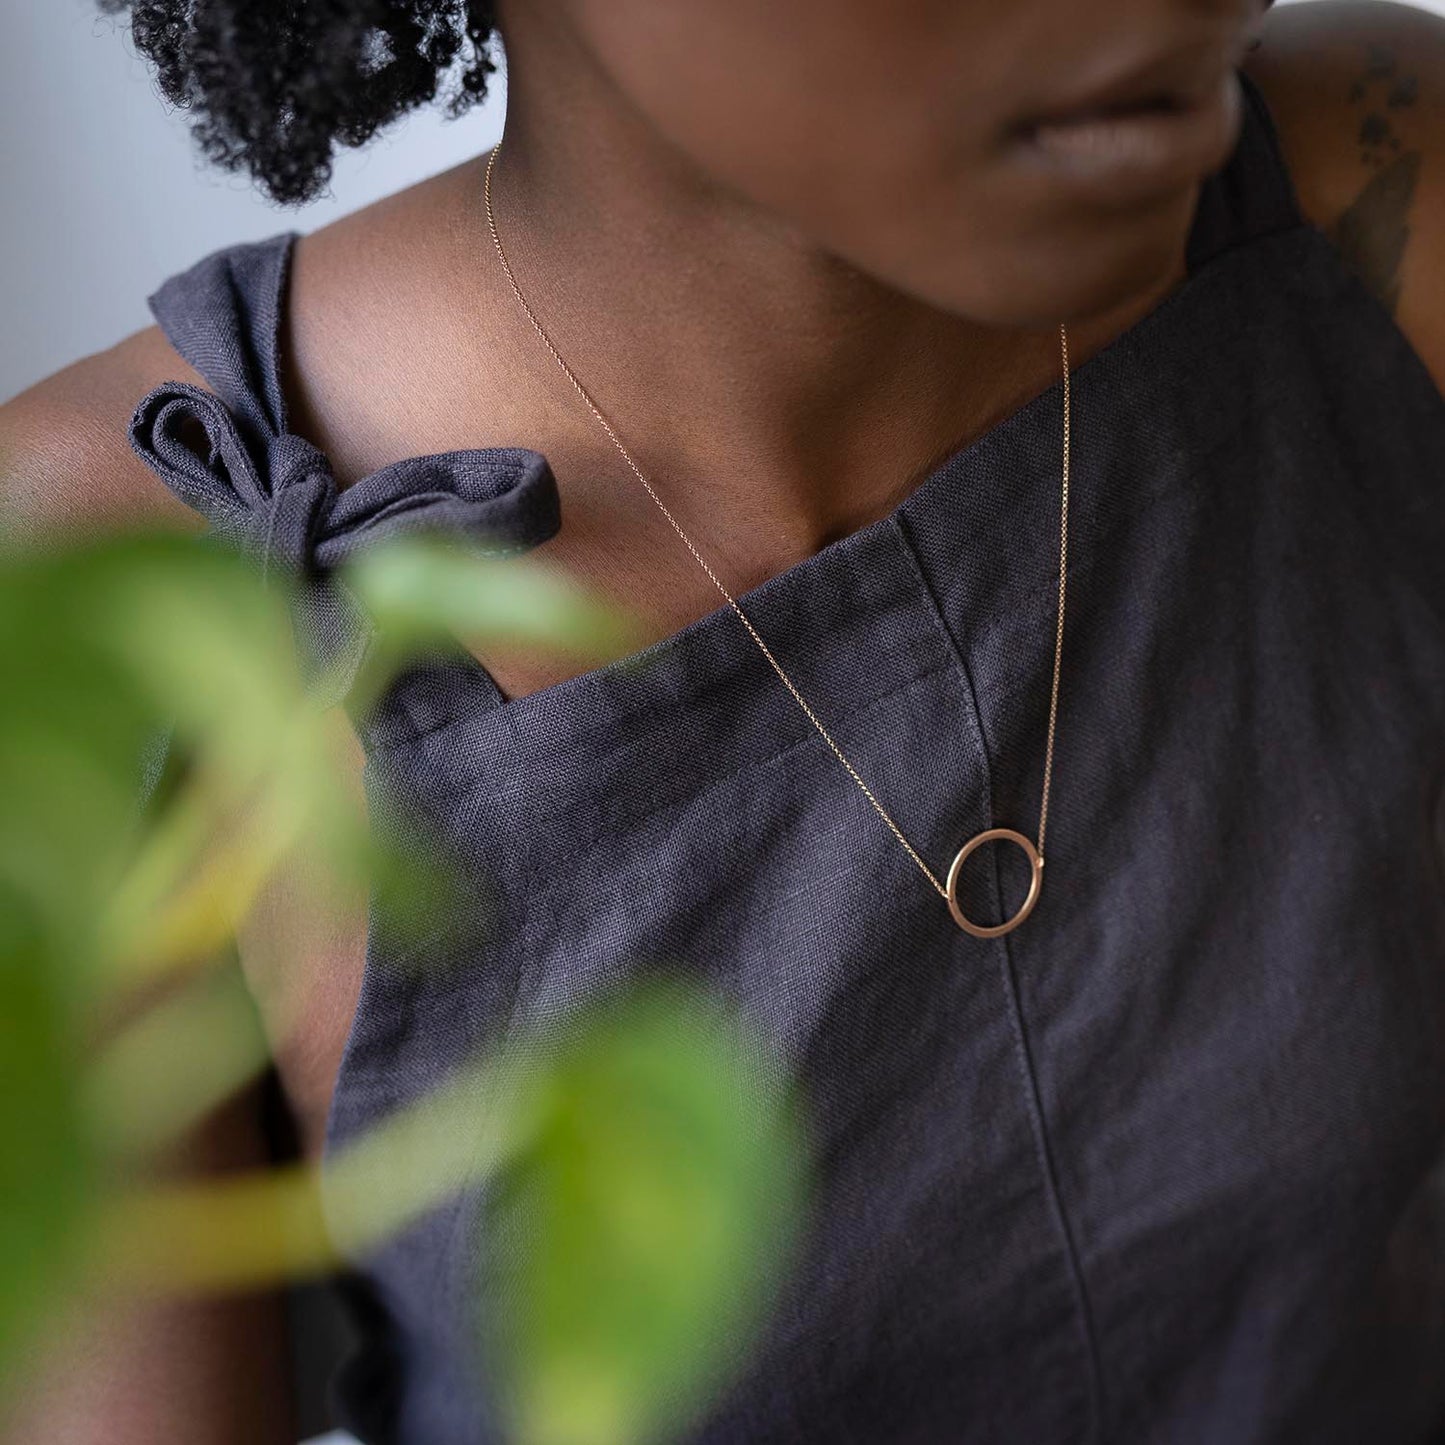 Circular Polished Necklace in Recycled Rose Gold